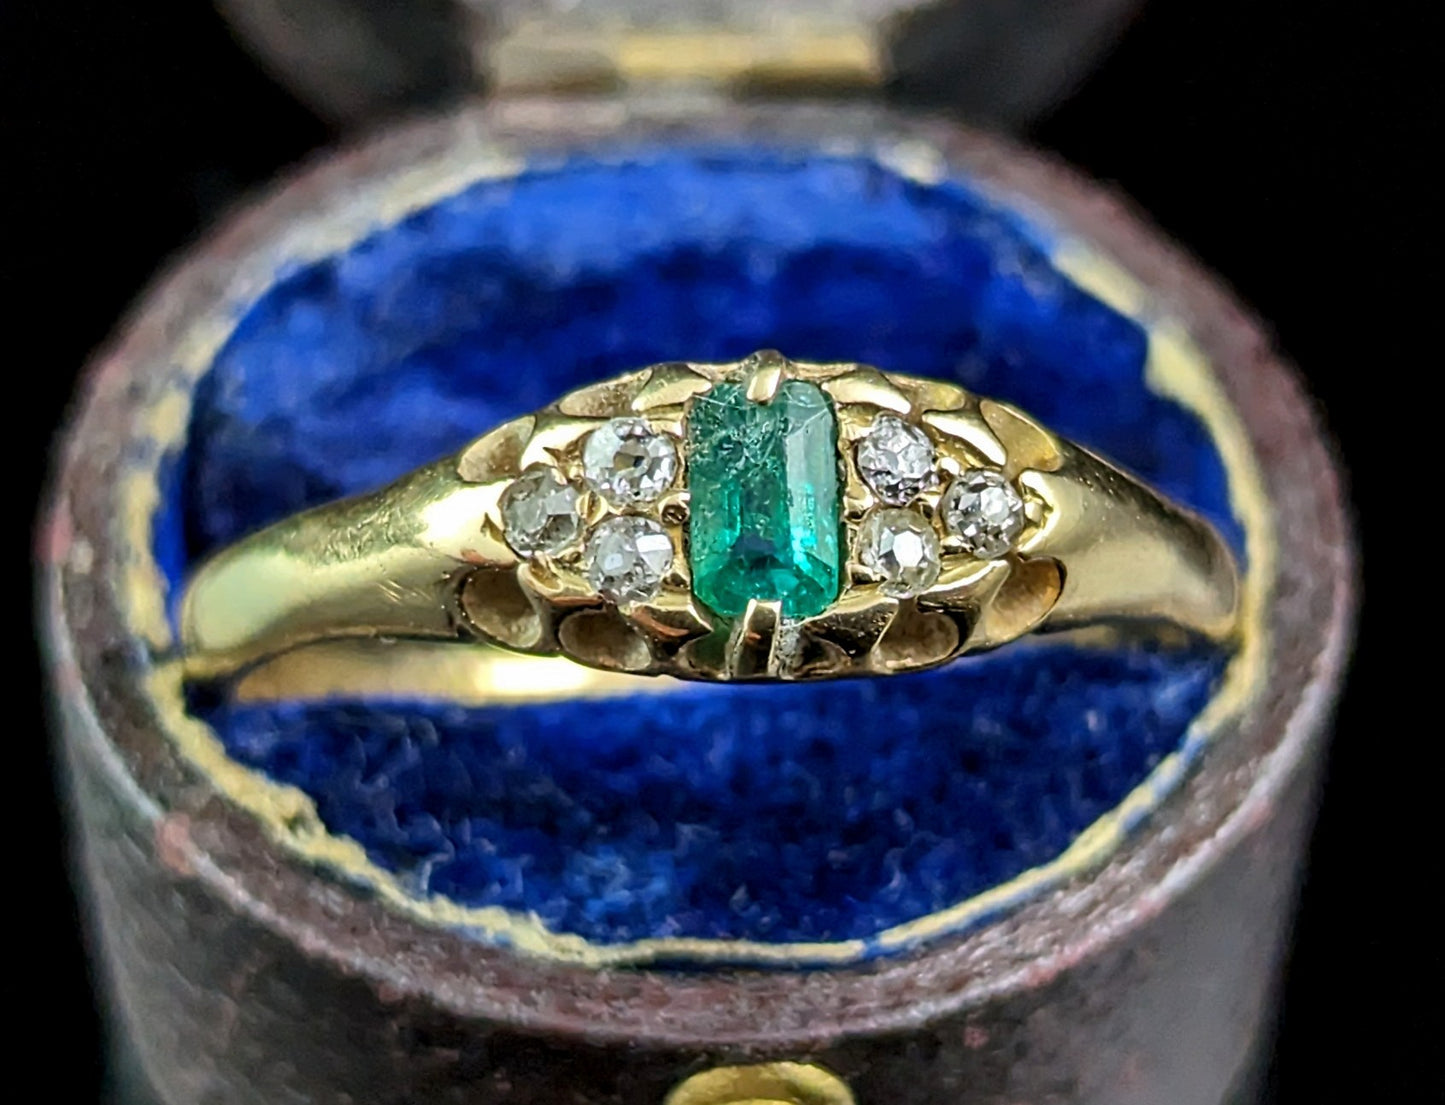 Antique Emerald and Diamond ring, 18ct gold, Victorian